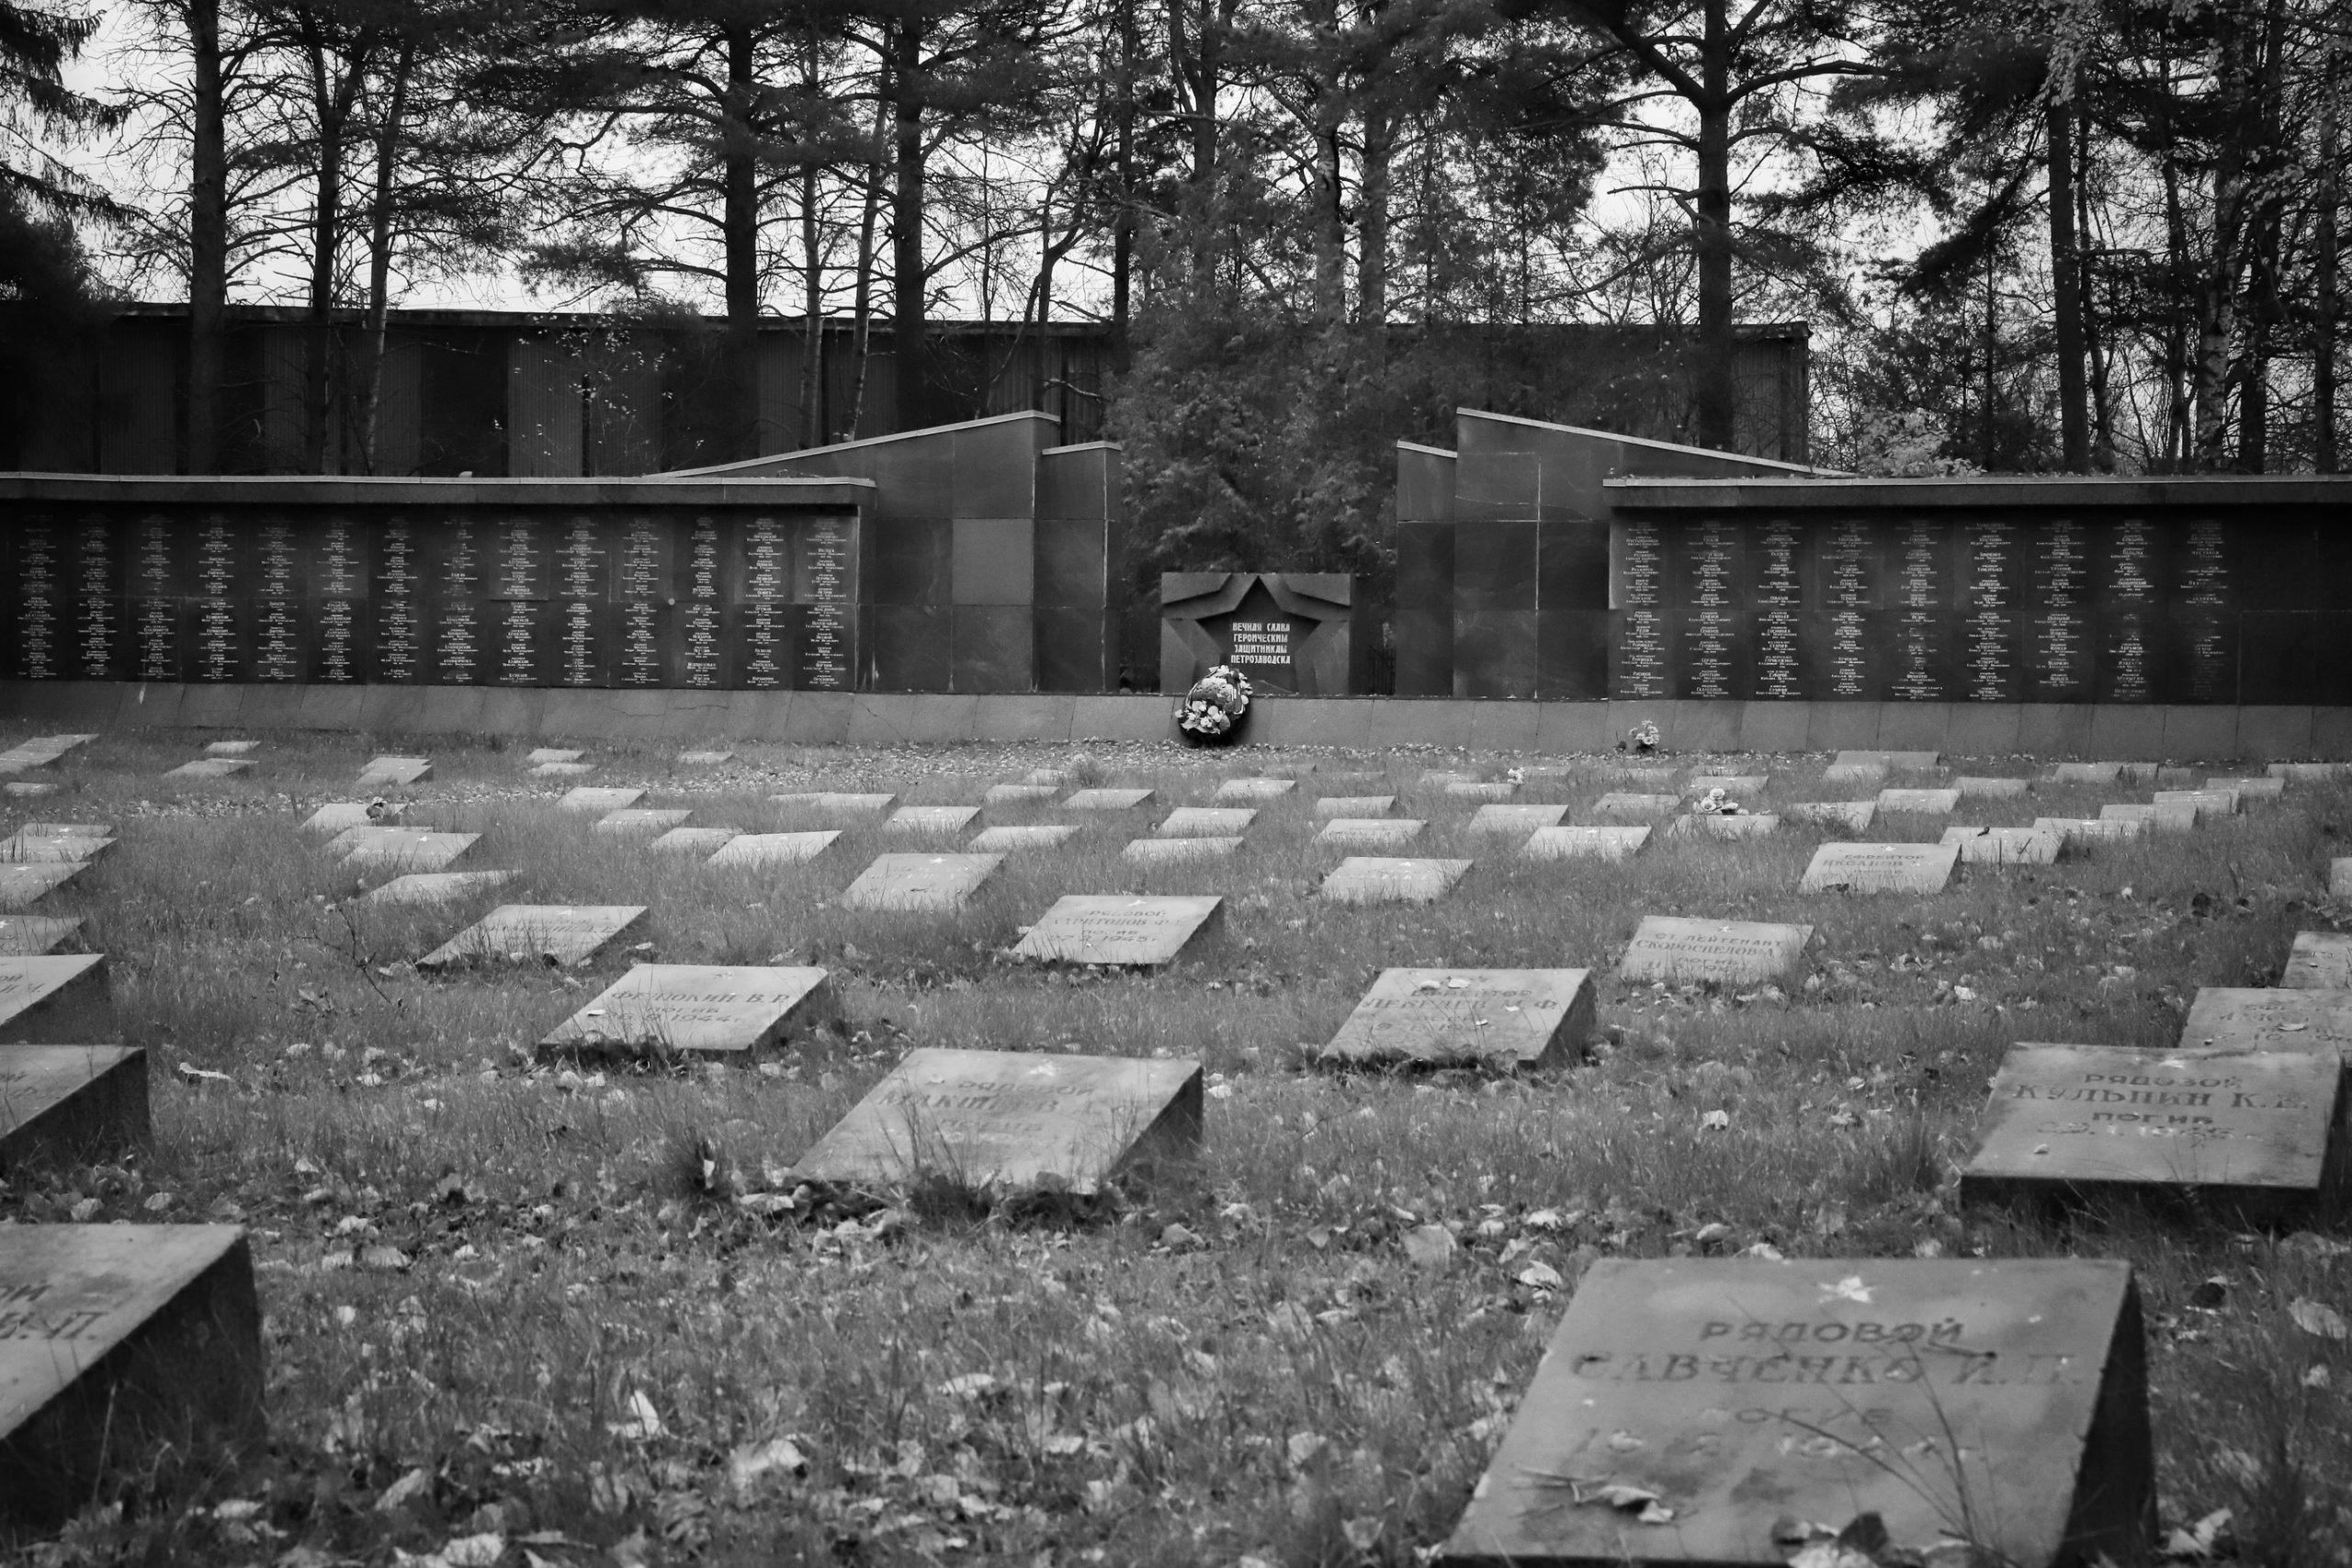 Cemetery tourims: black and white photo of a military cemetery